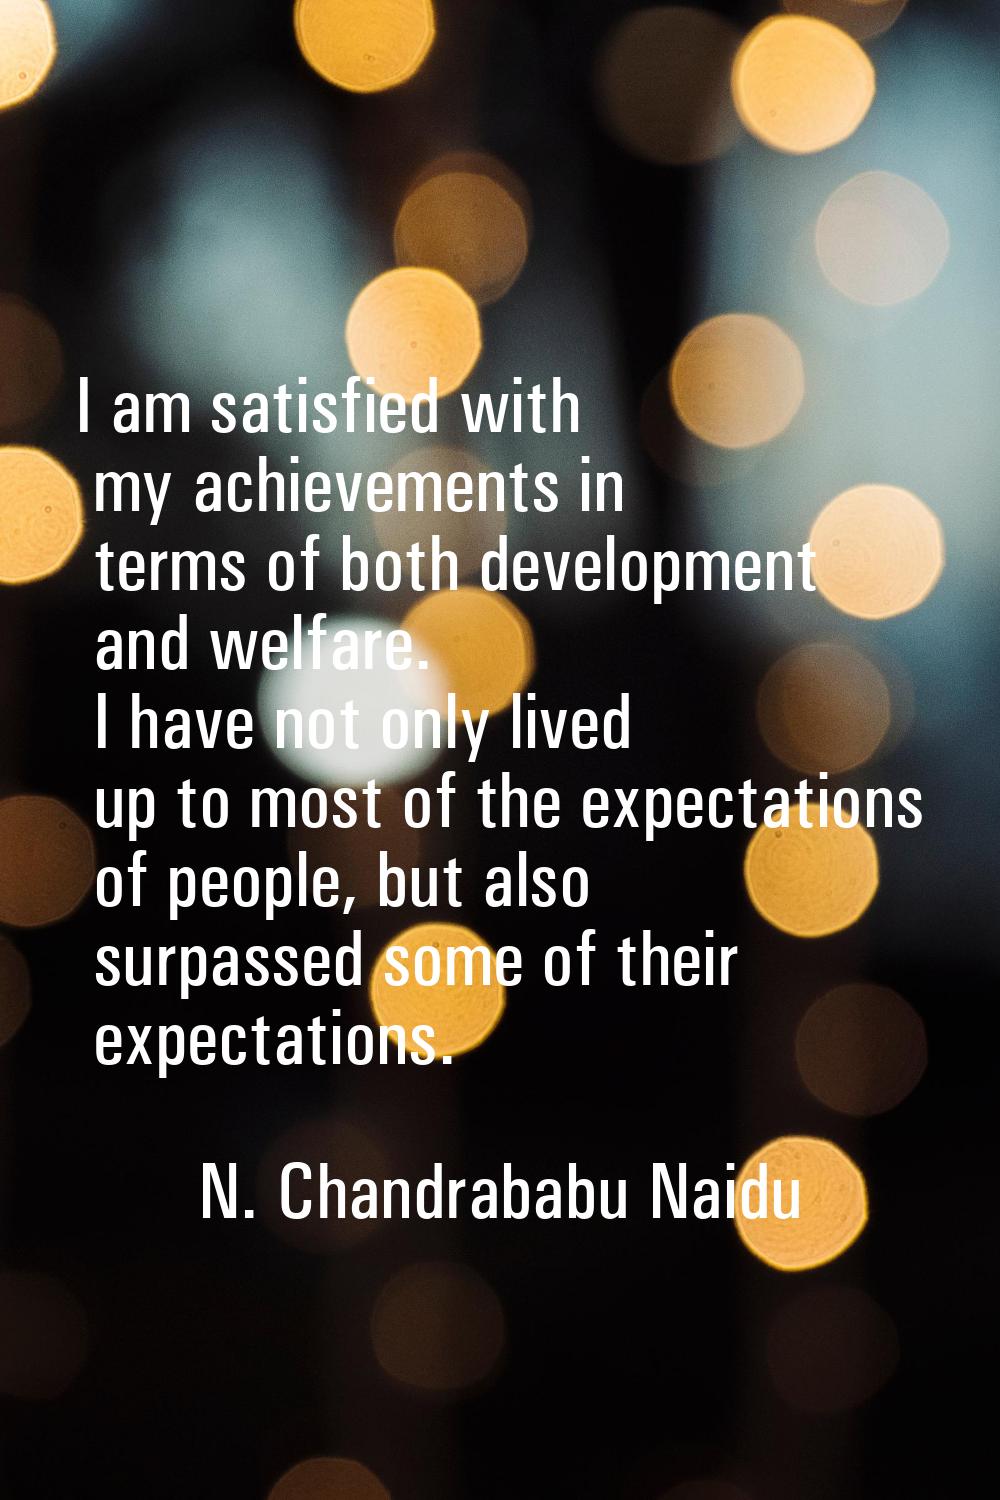 I am satisfied with my achievements in terms of both development and welfare. I have not only lived